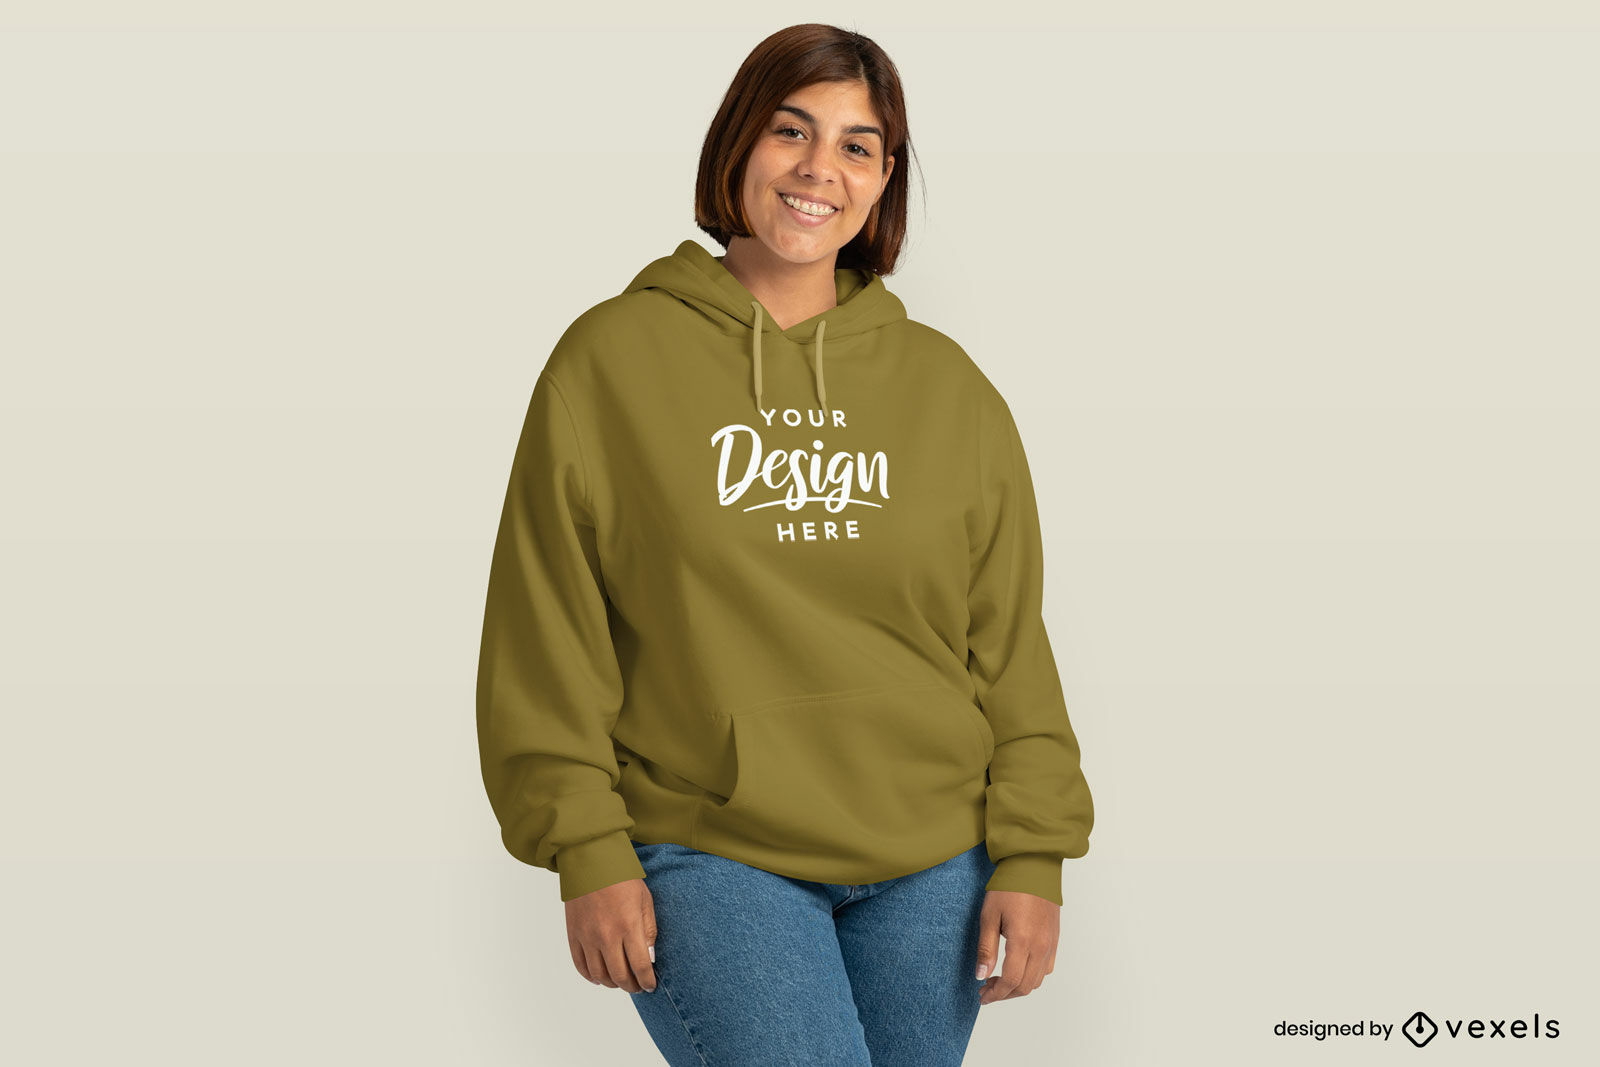 Plus size woman with short hair and hoodie mockup